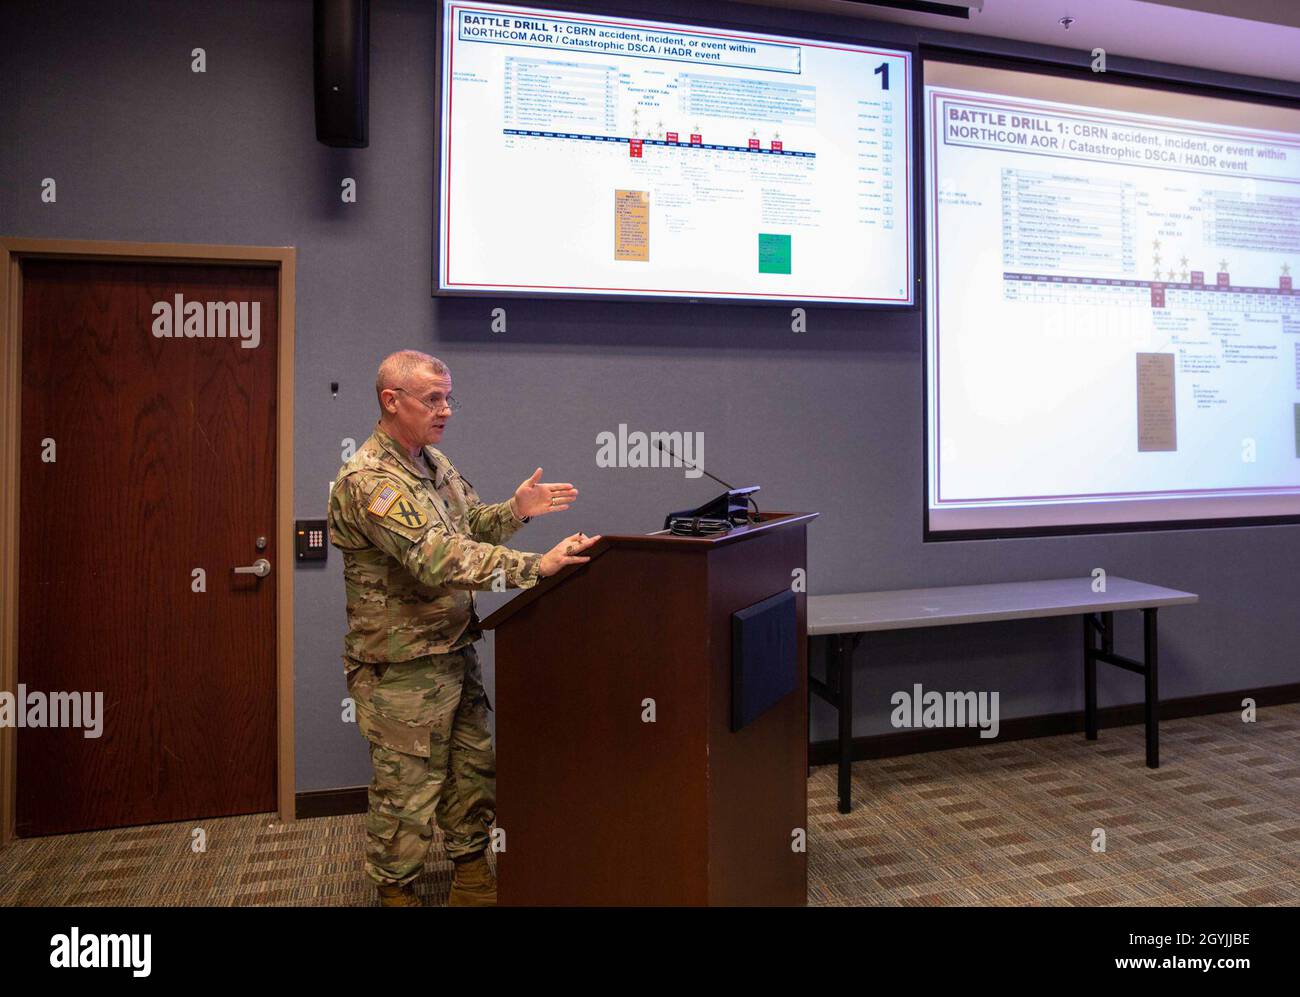 U.S. Army Lt. Col. Donald Thompson, Joint Task Force Civil Support (JTF-CS) current operations division chief, briefs JTF-CS and Defense Chemical, Biological, Radiological and Nuclear (CBRN) Response Force (DCRF) personnel during the command’s Exercise Sudden Response 2020 (SR20) staff academics conference, held at the command’s headquarters, Jan. 6-8. During the event, JTF-CS and DCRF personnel focused on major movements and friction points that would be encountered during the deployment and operation phases of SR20. (Official DoD photo by Mass Communication Specialist 3rd Class Michael Redd/ Stock Photo